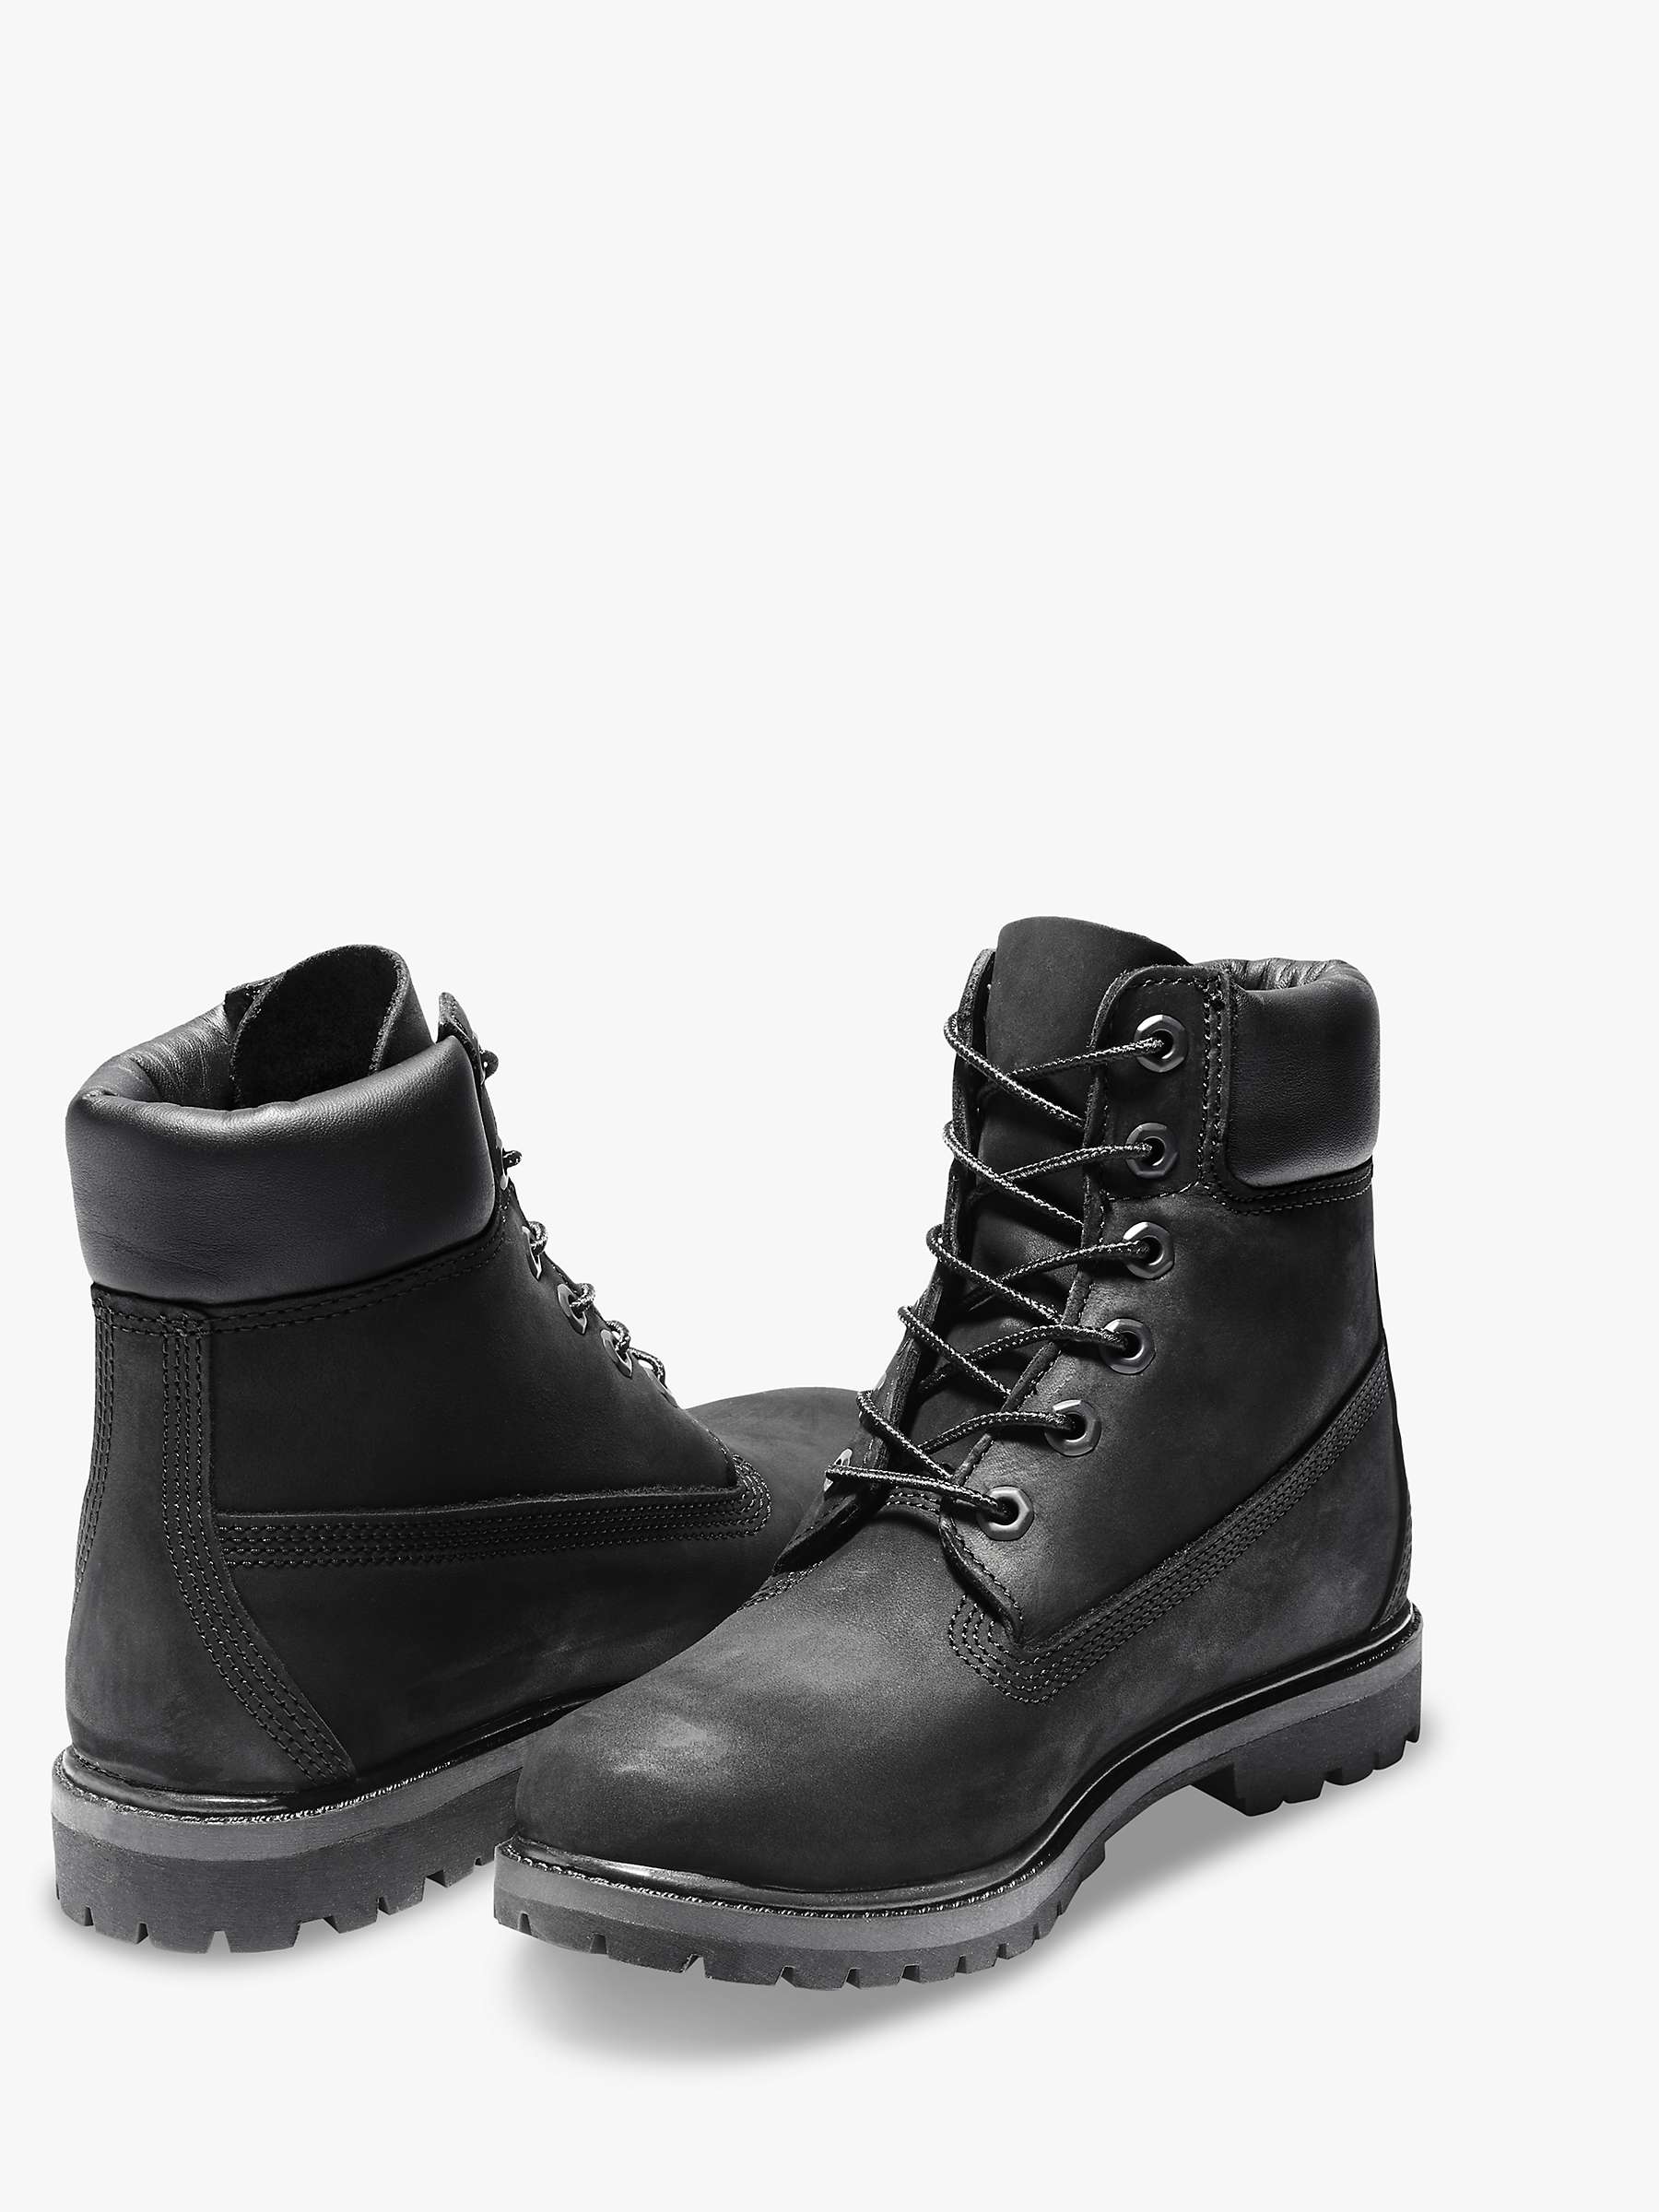 Buy Timberland Classic 6 Inch Waterproof Leather Boots Online at johnlewis.com